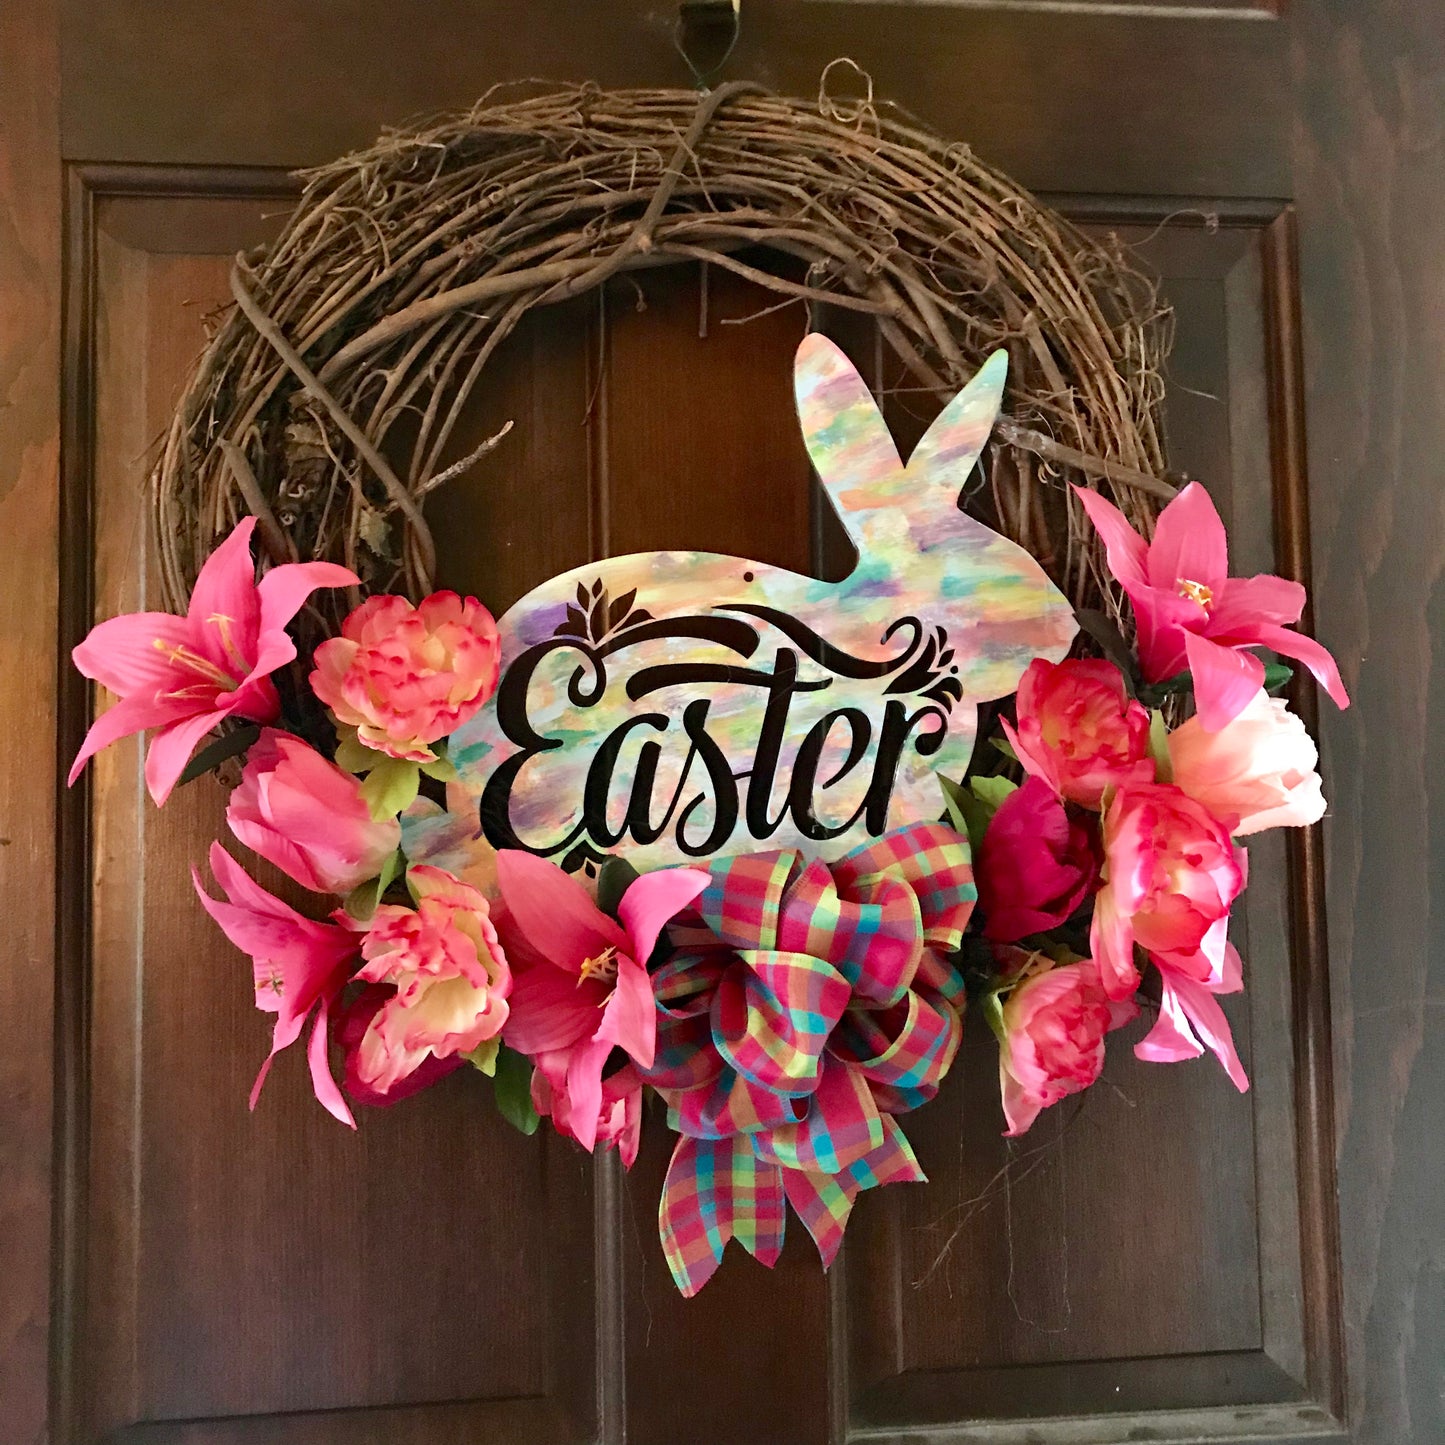 Easter and Spring Grapevine Wreaths - She Shed Home Decor